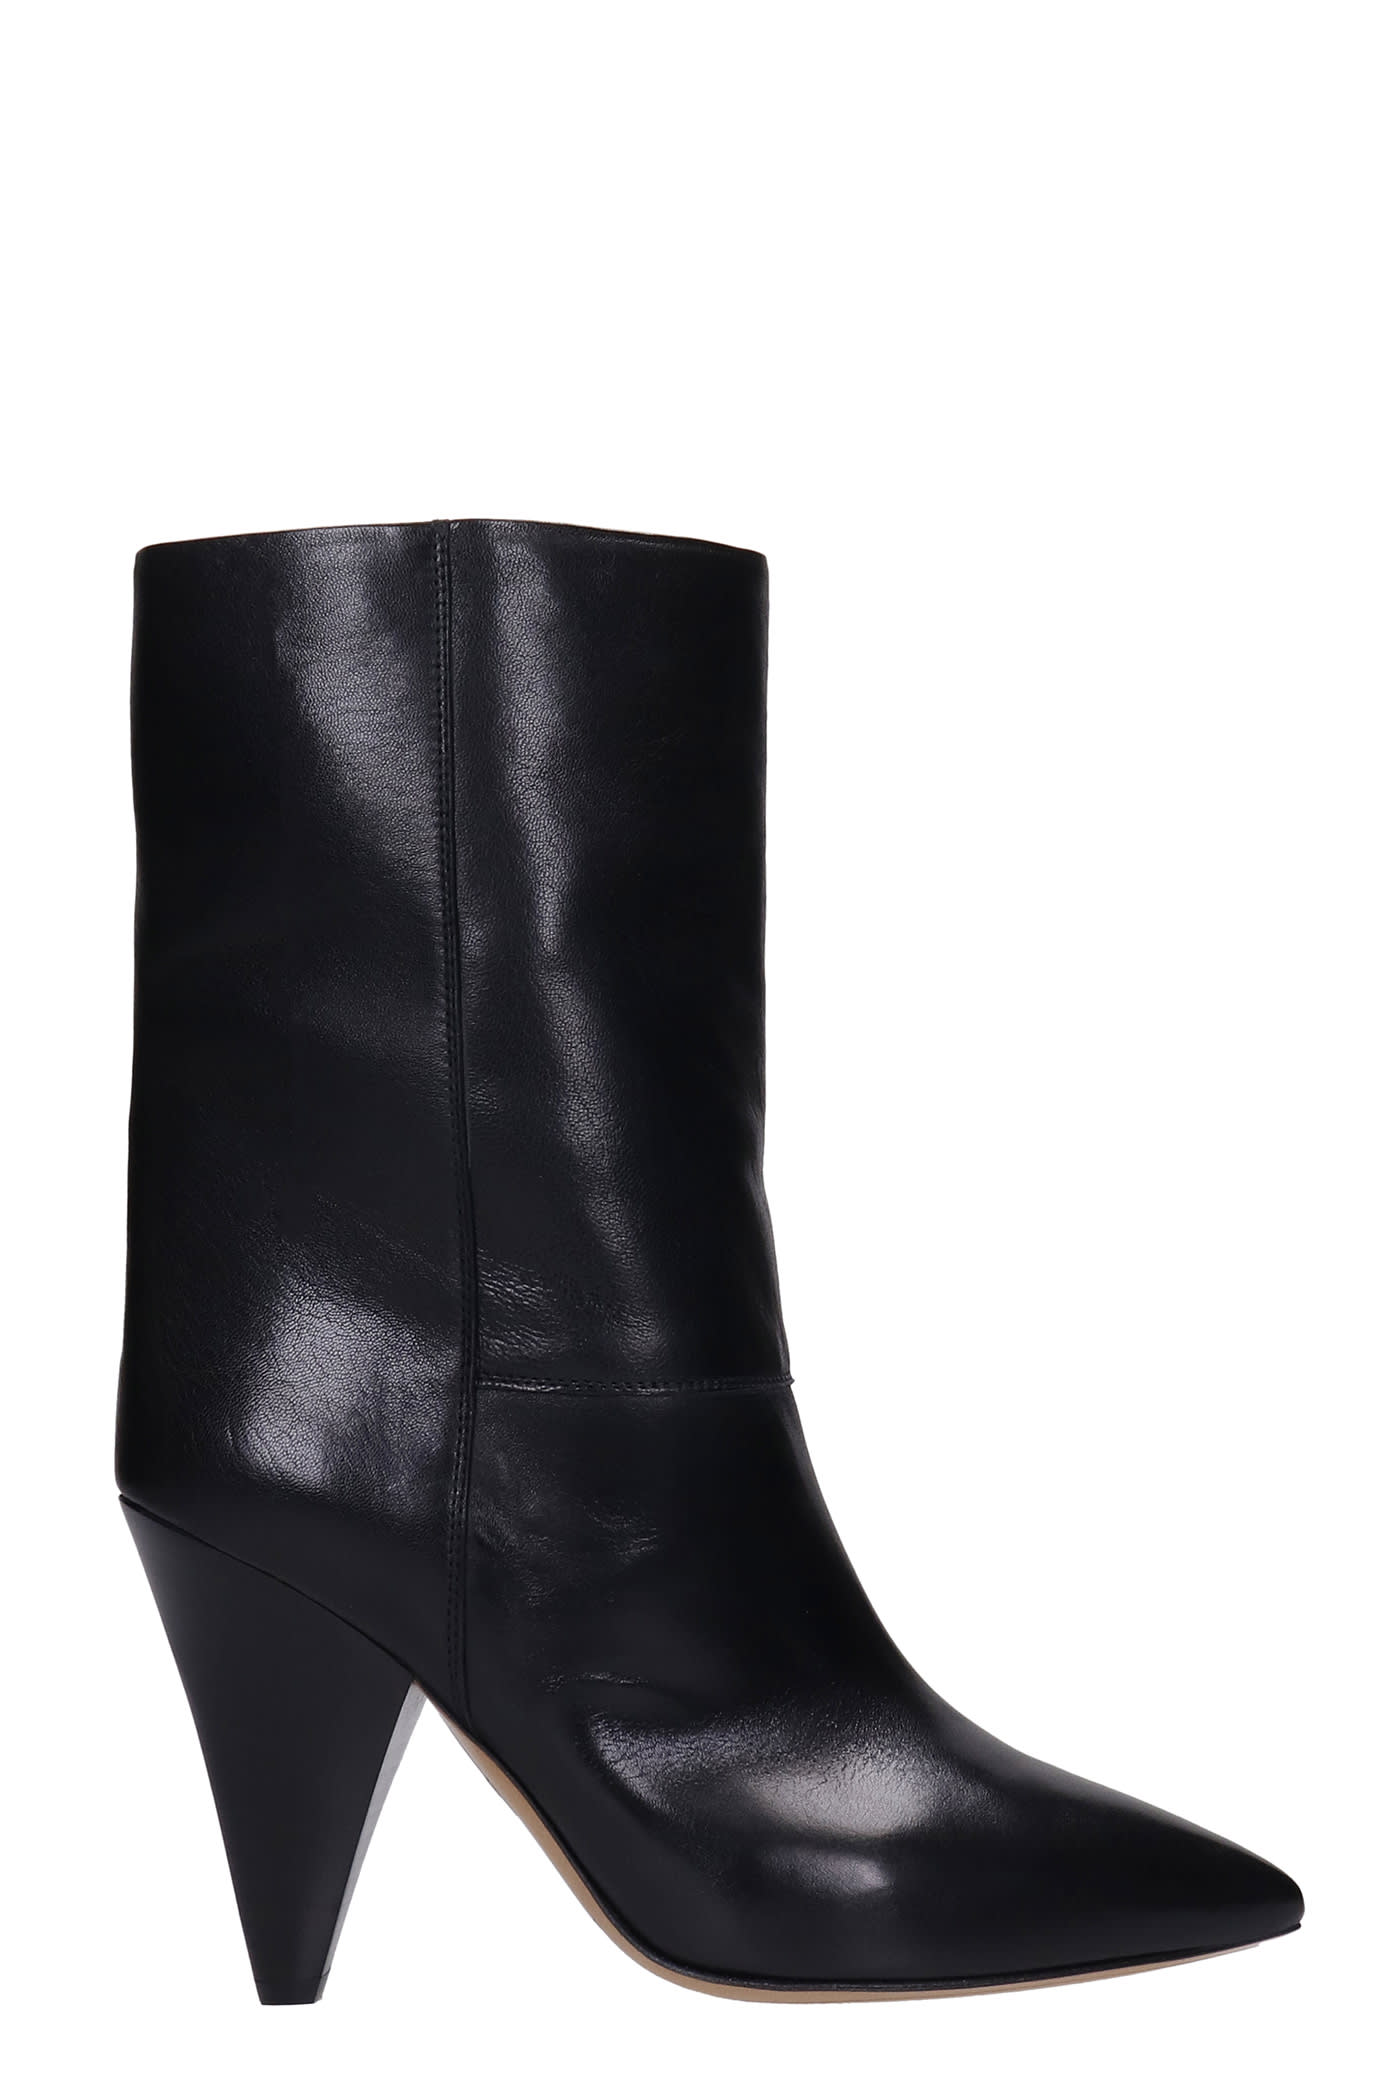 Isabel Marant Locky High Heels Ankle Boots In Black Leather